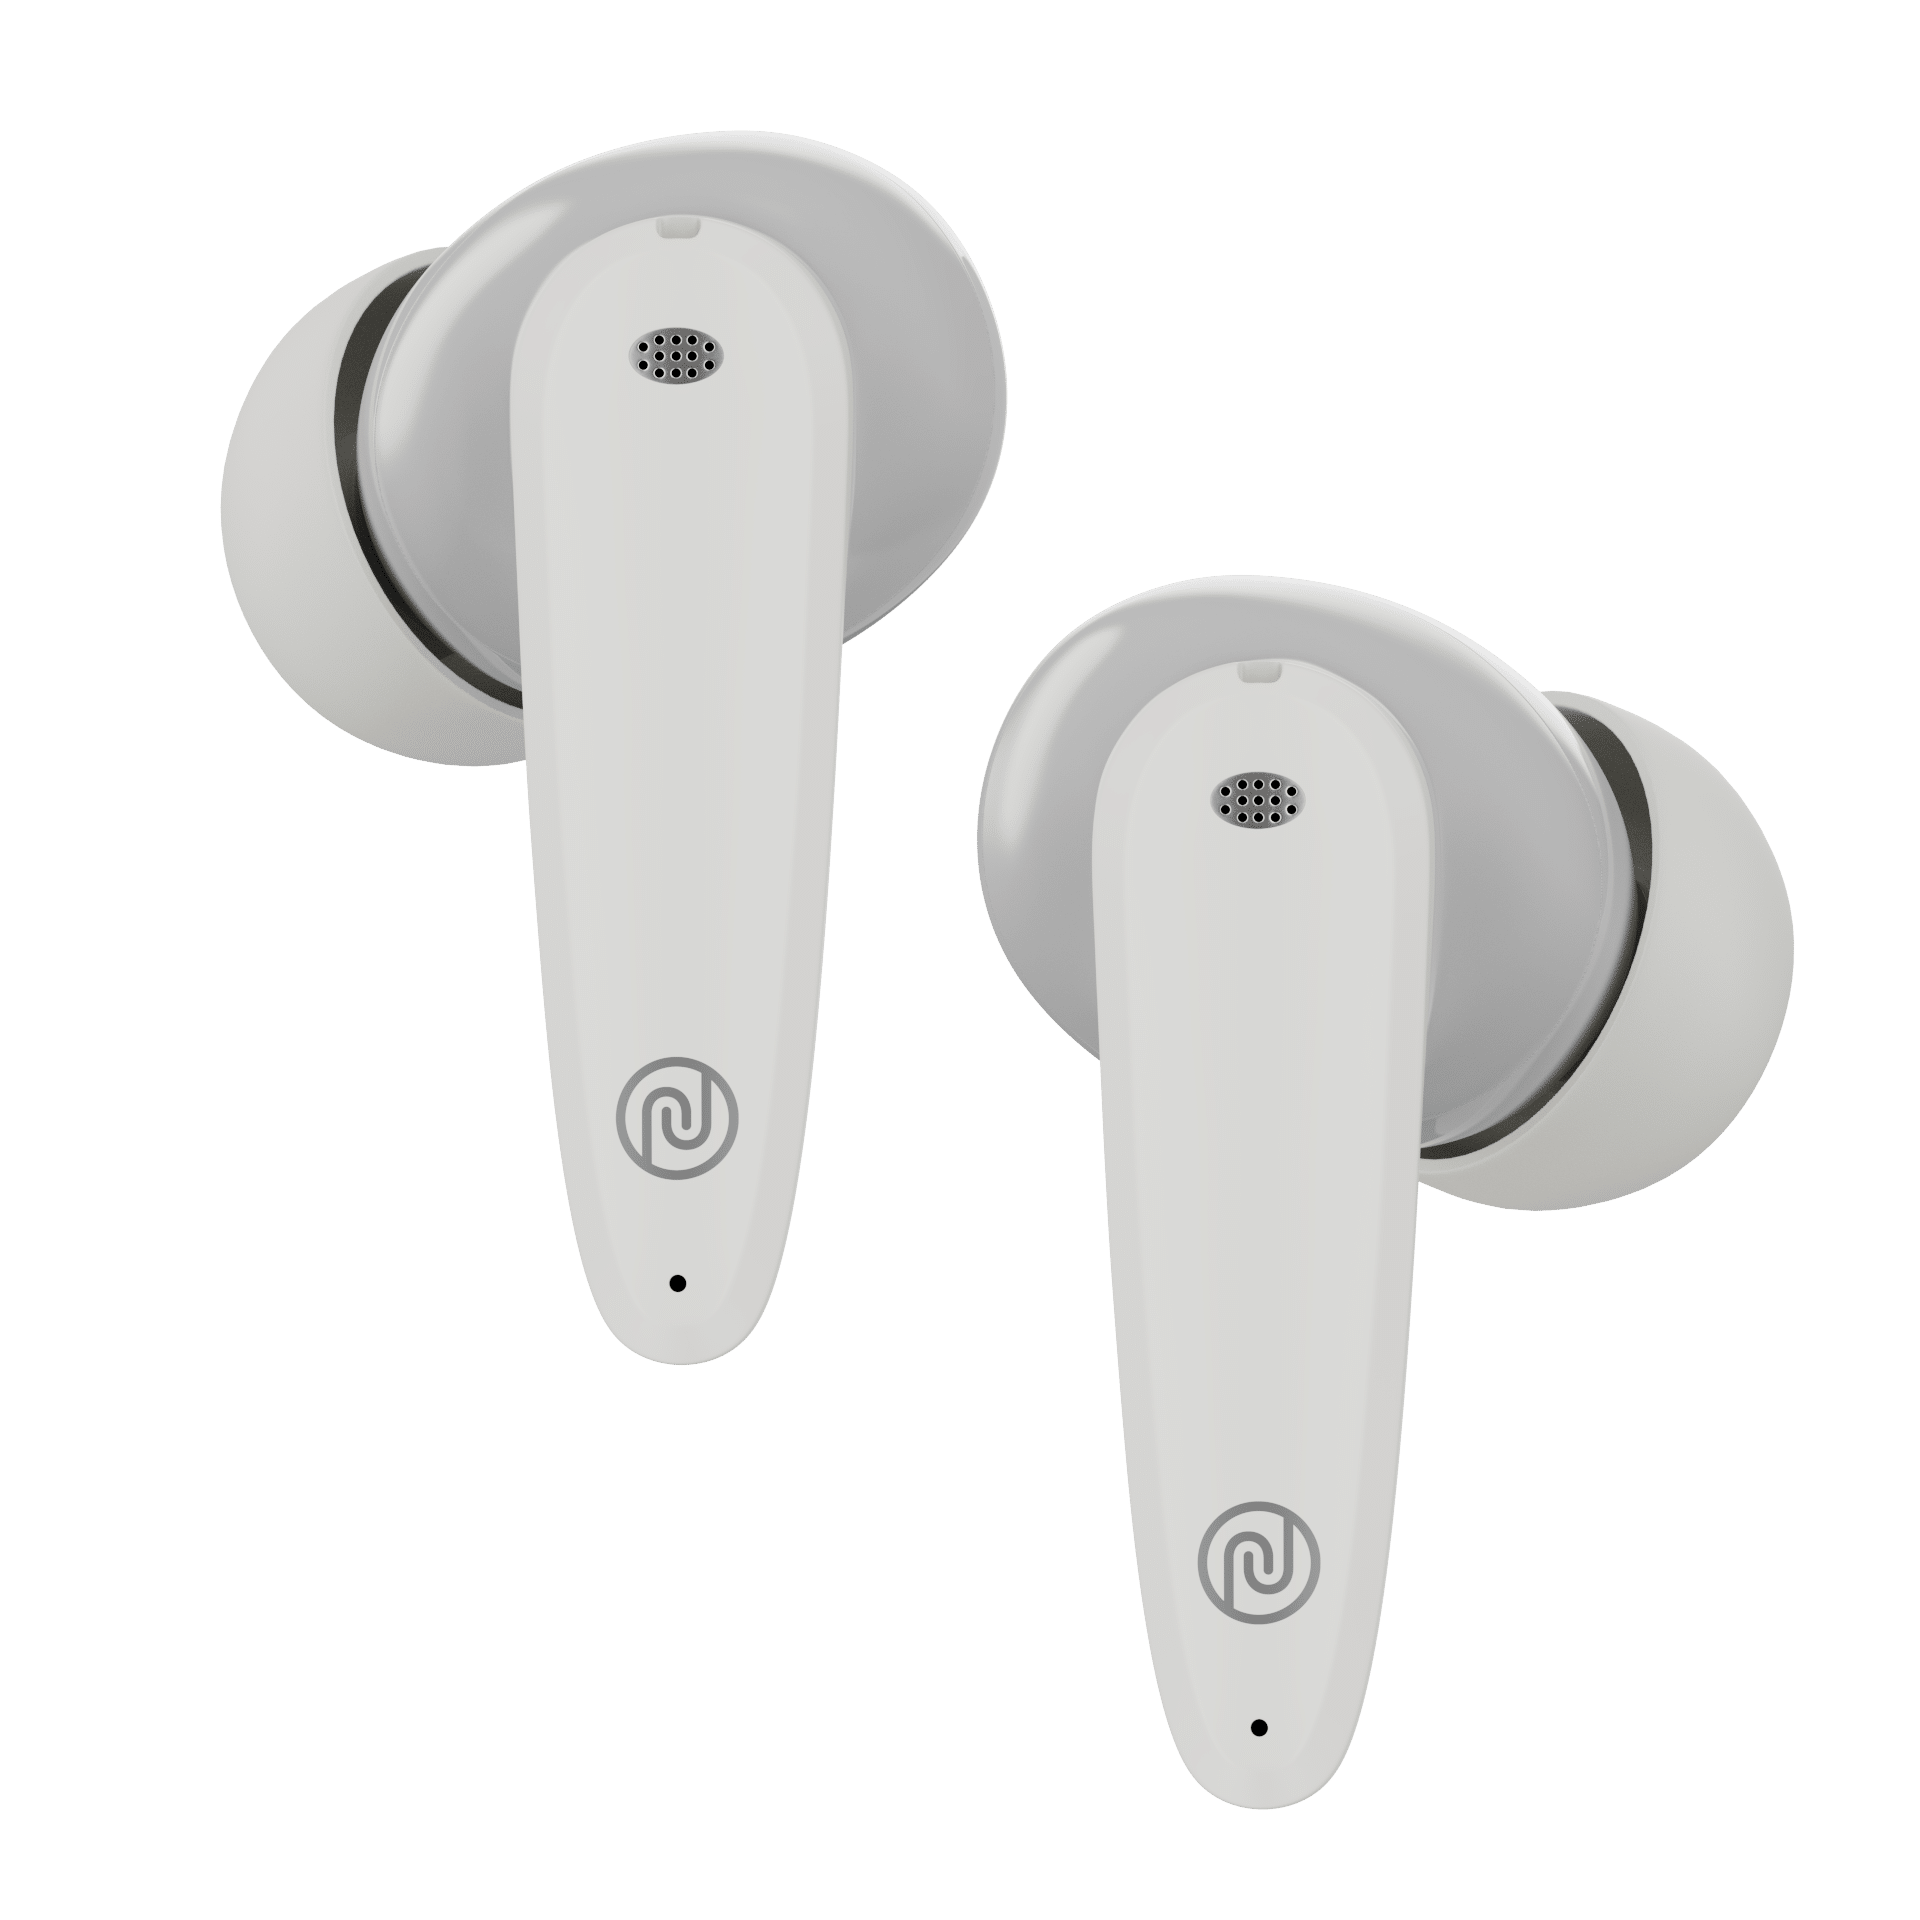 Noise Buds VS106 Features & Specifications